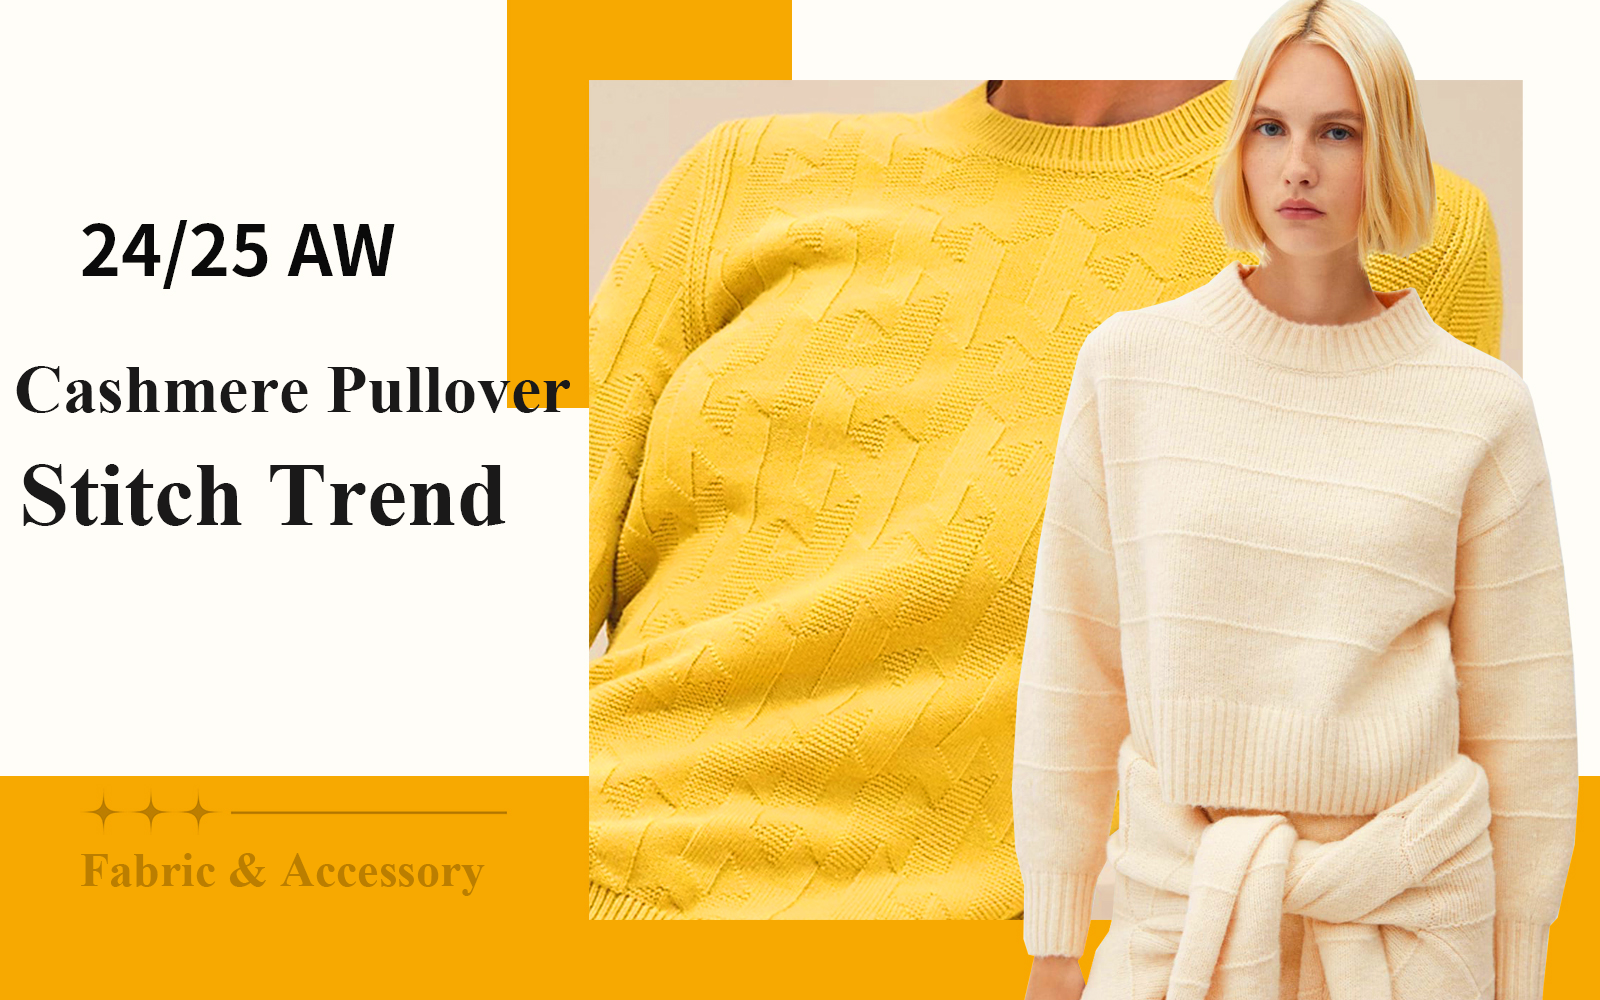 The Stitch Trend for Women's Cashmere Pullover